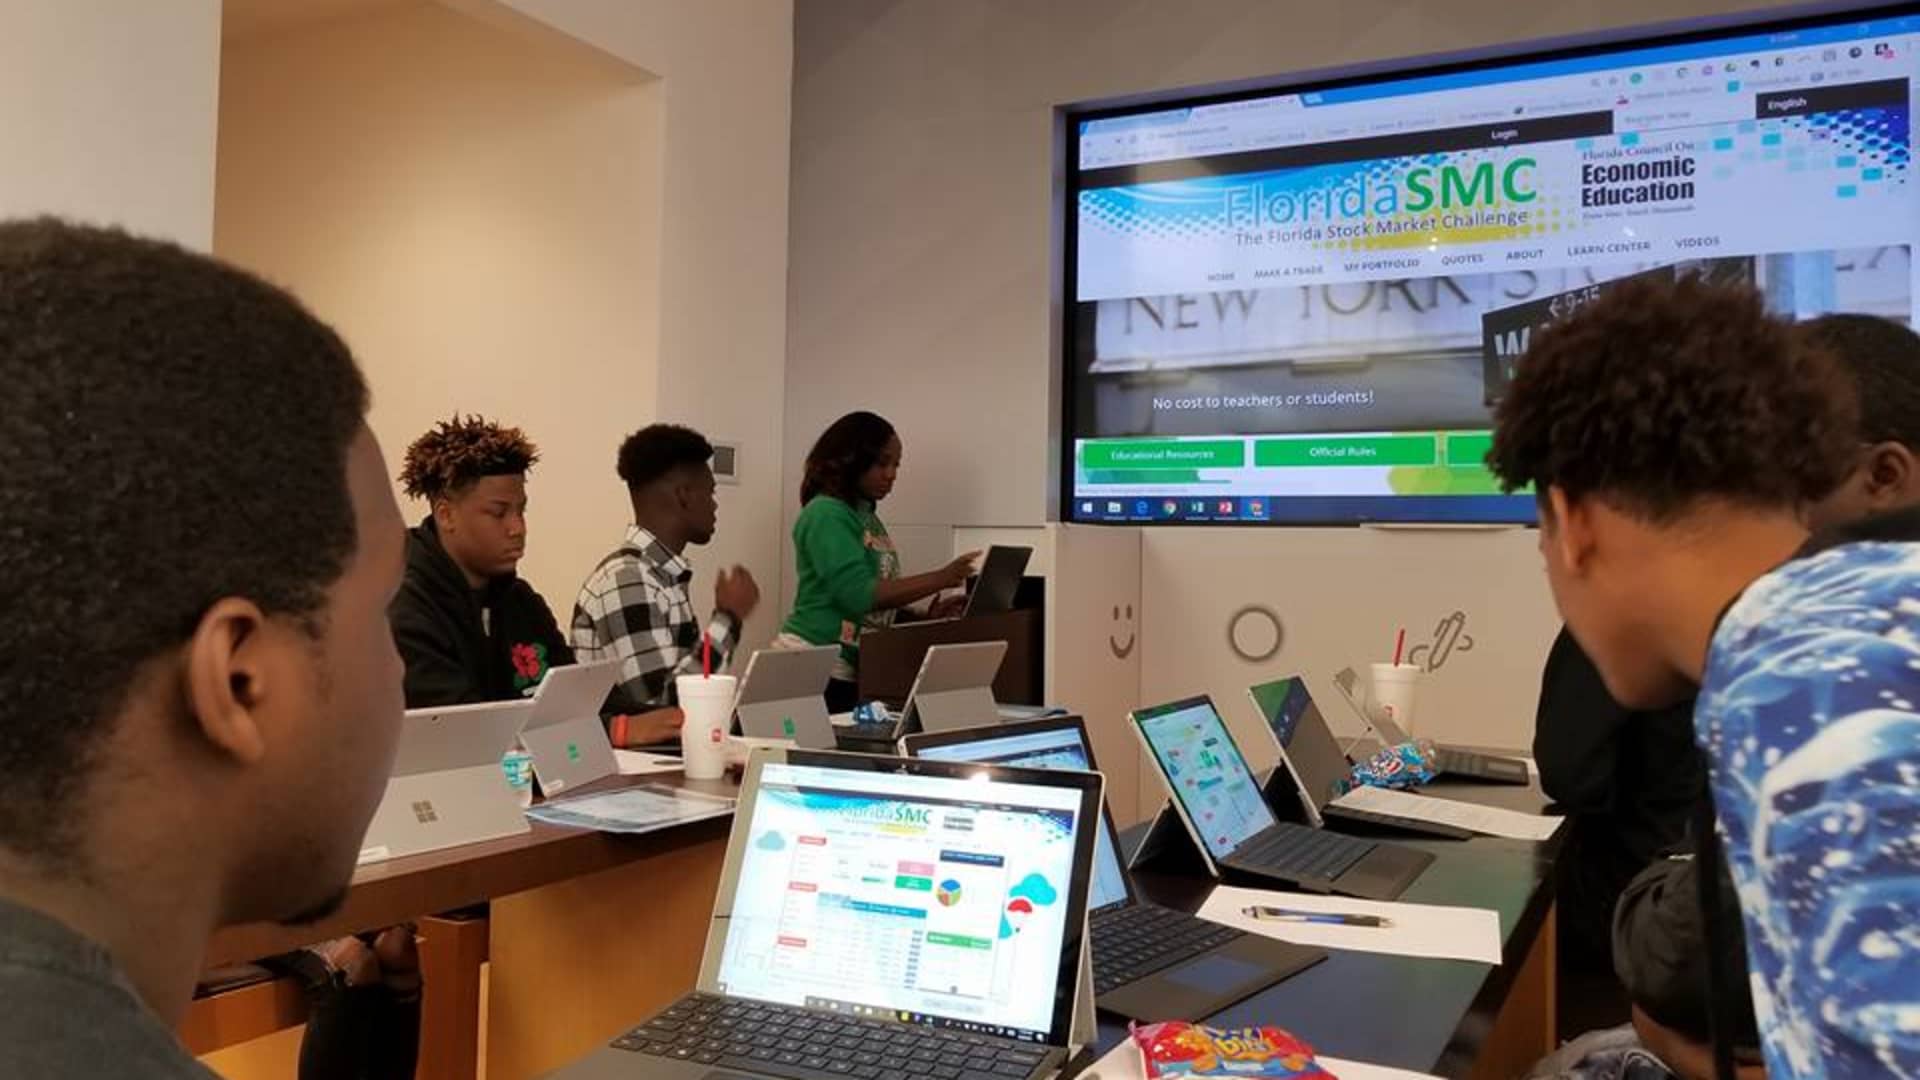 Students from 8 Cents in a Jar participate in 'The Stock Market Challenge', an online simulation of the global markets meant to teach them about economics and investing.